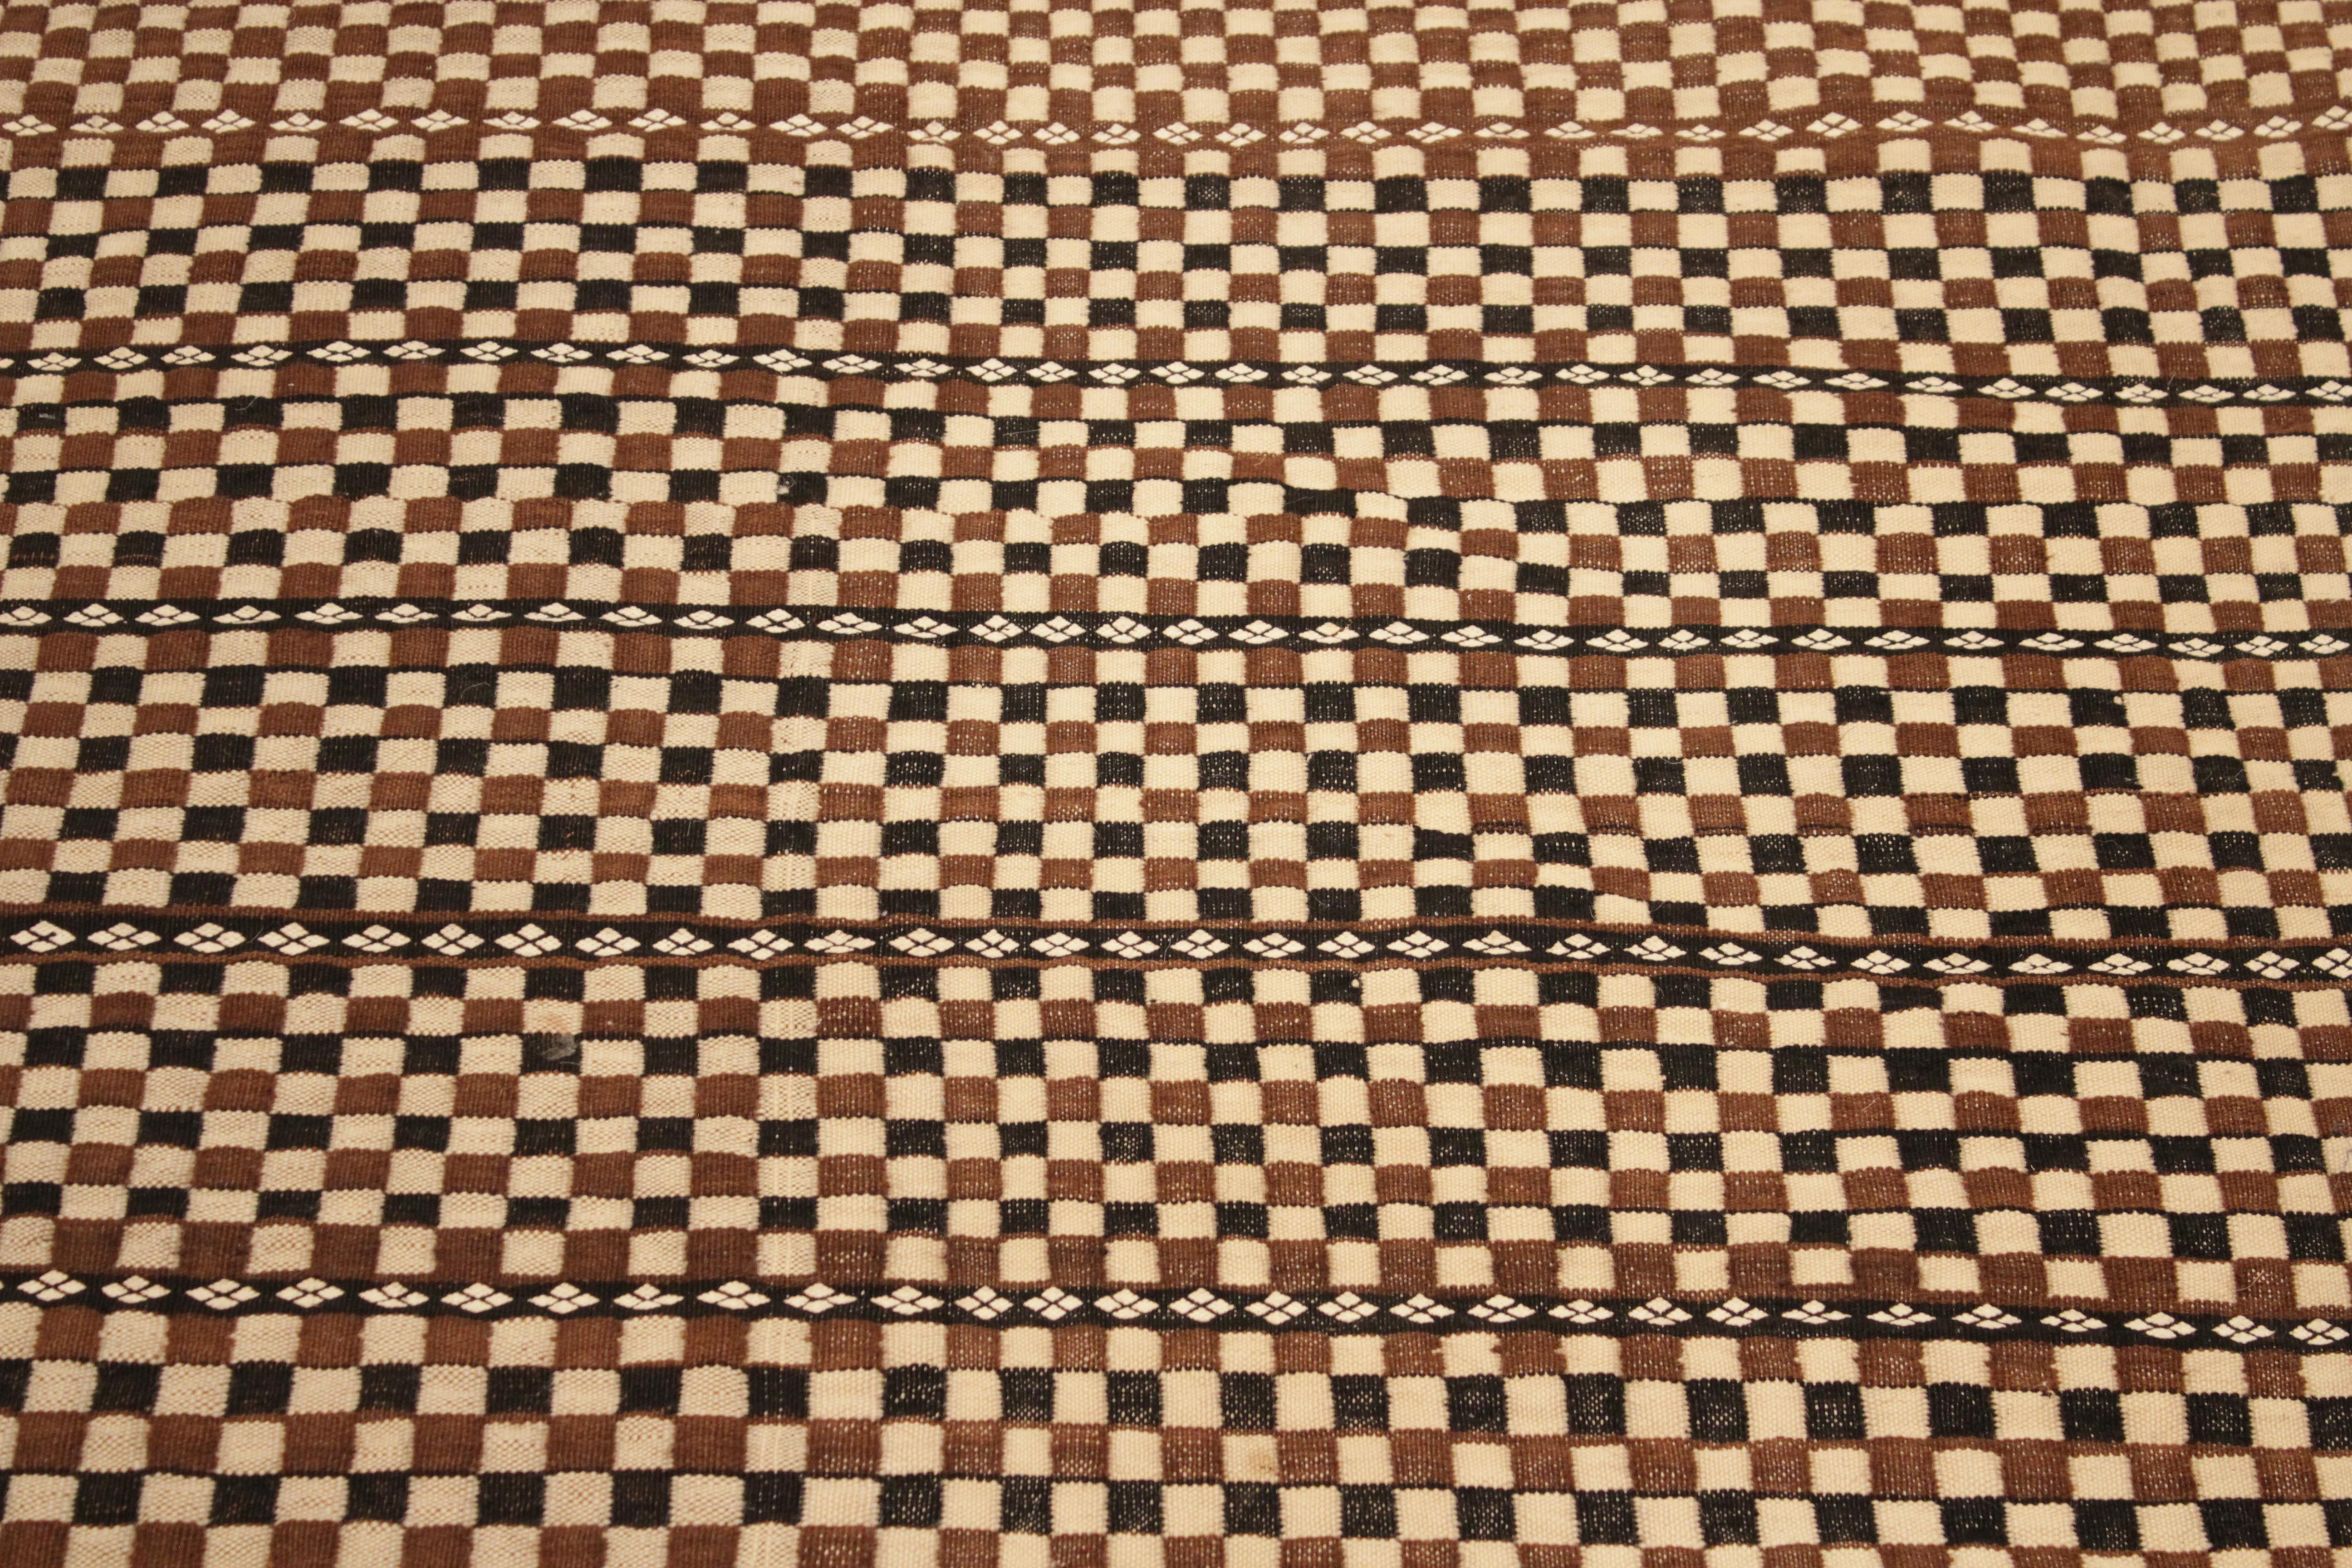 Fine Antique Moroccan Berber Checkerboard Design Flat-Woven Rug in Earth Tones  In Excellent Condition For Sale In Milan, IT